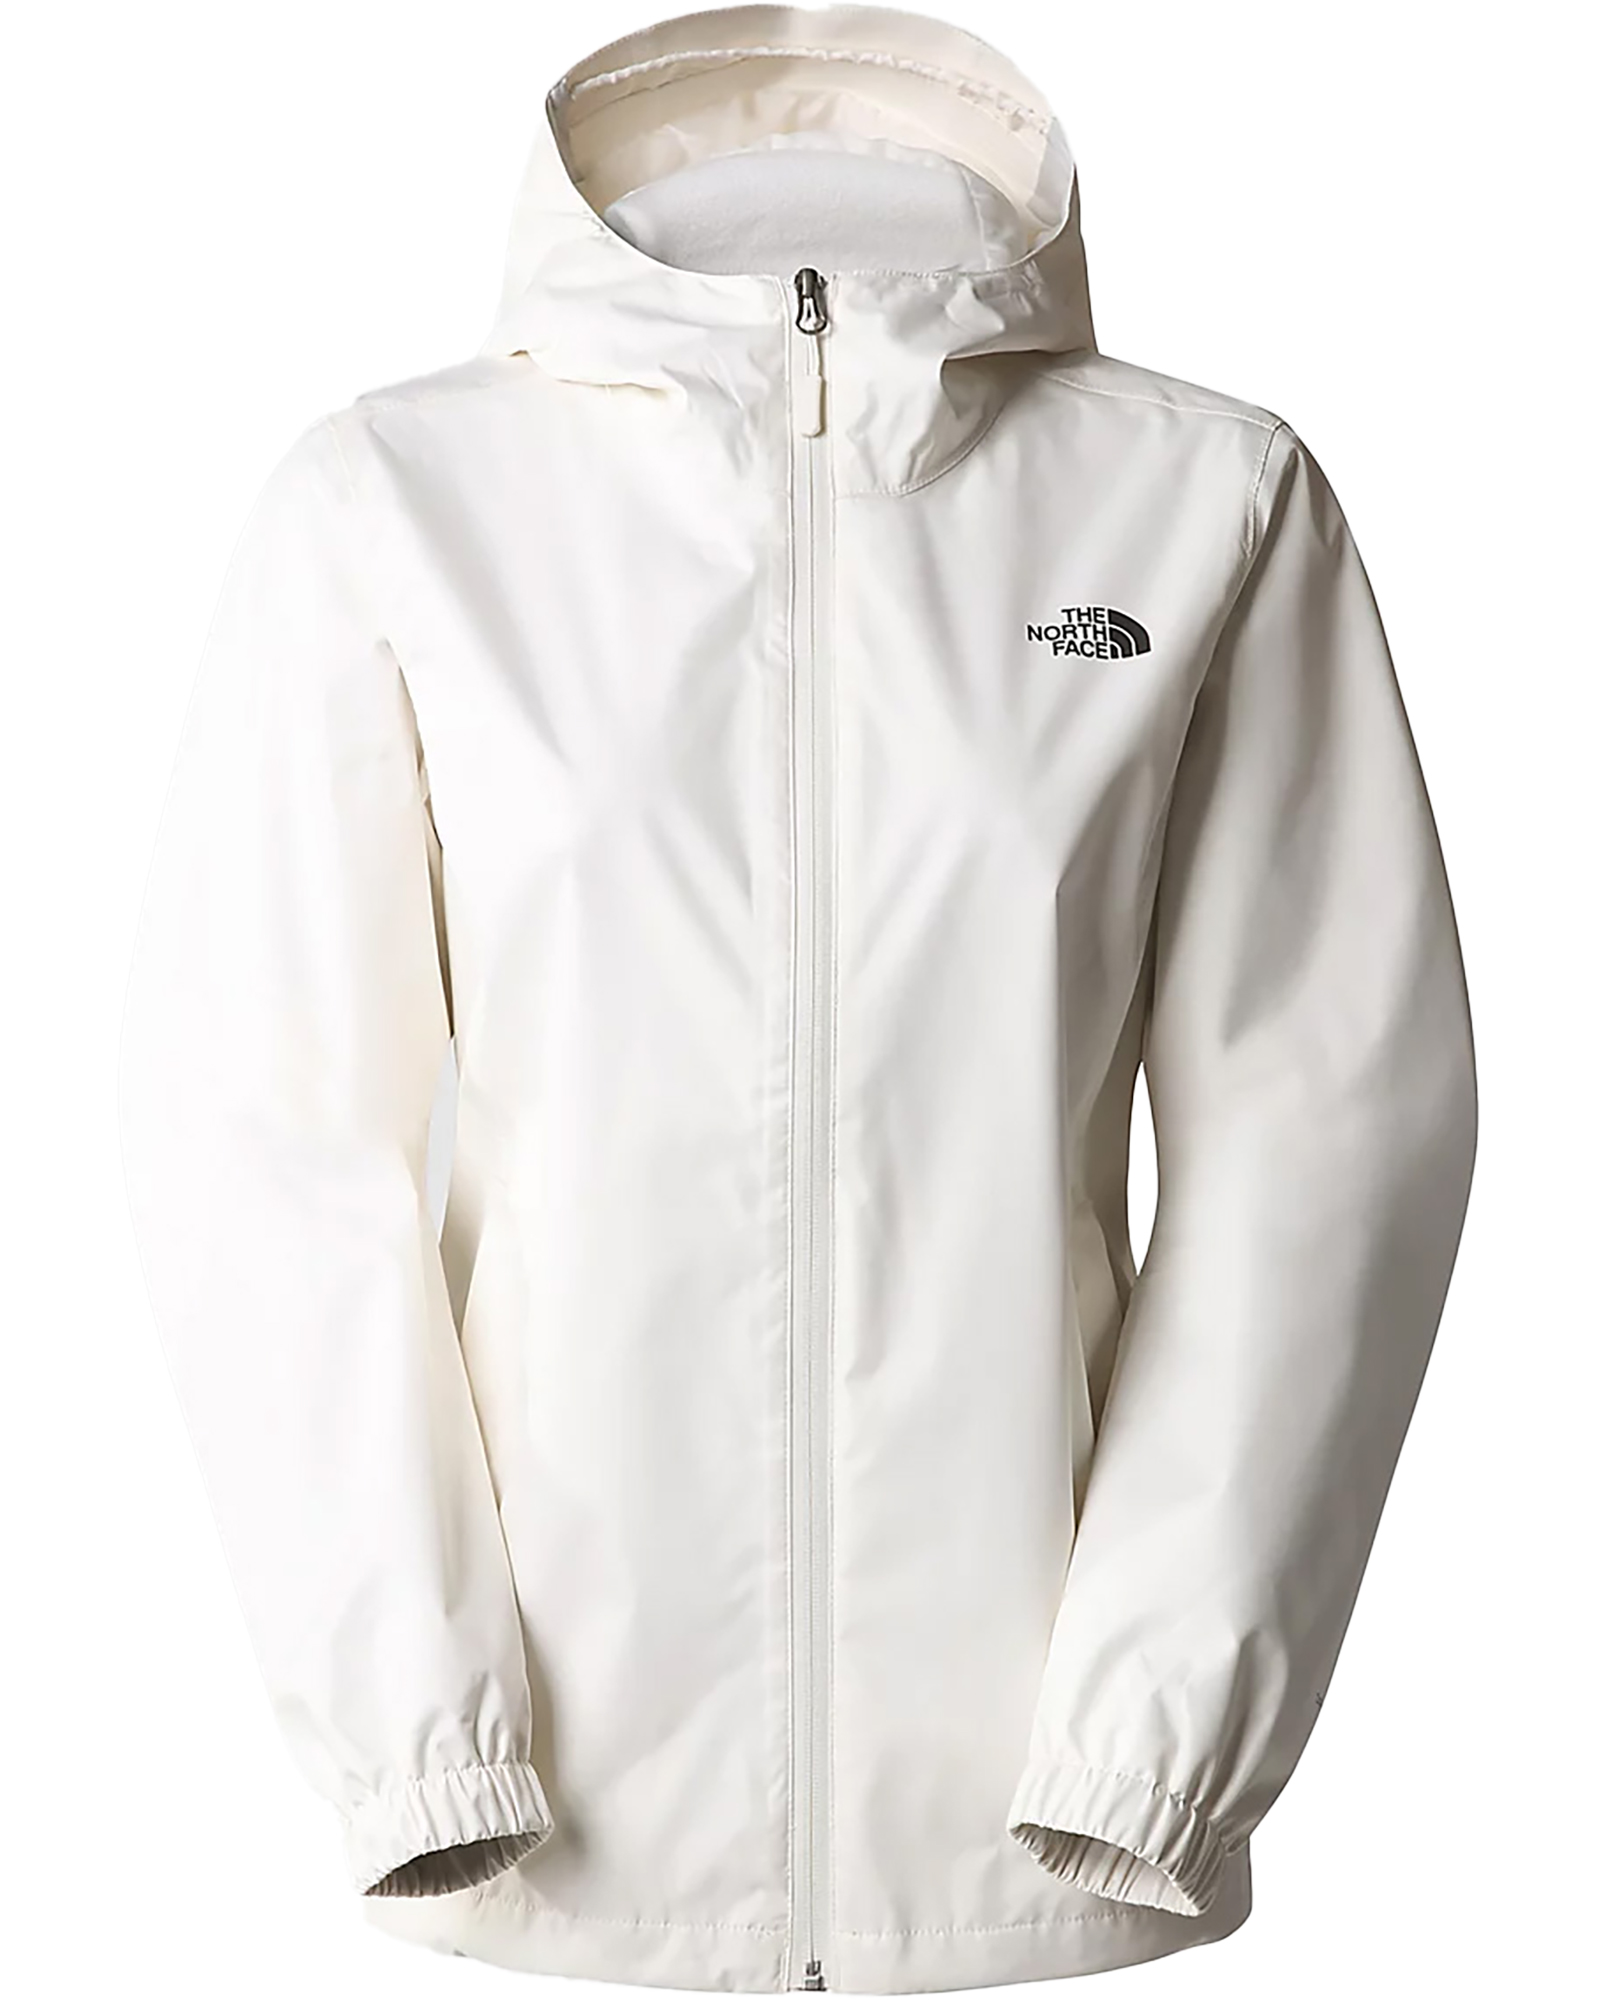 The North Face Quest DryVent Women’s Jacket - Gardenia White XS